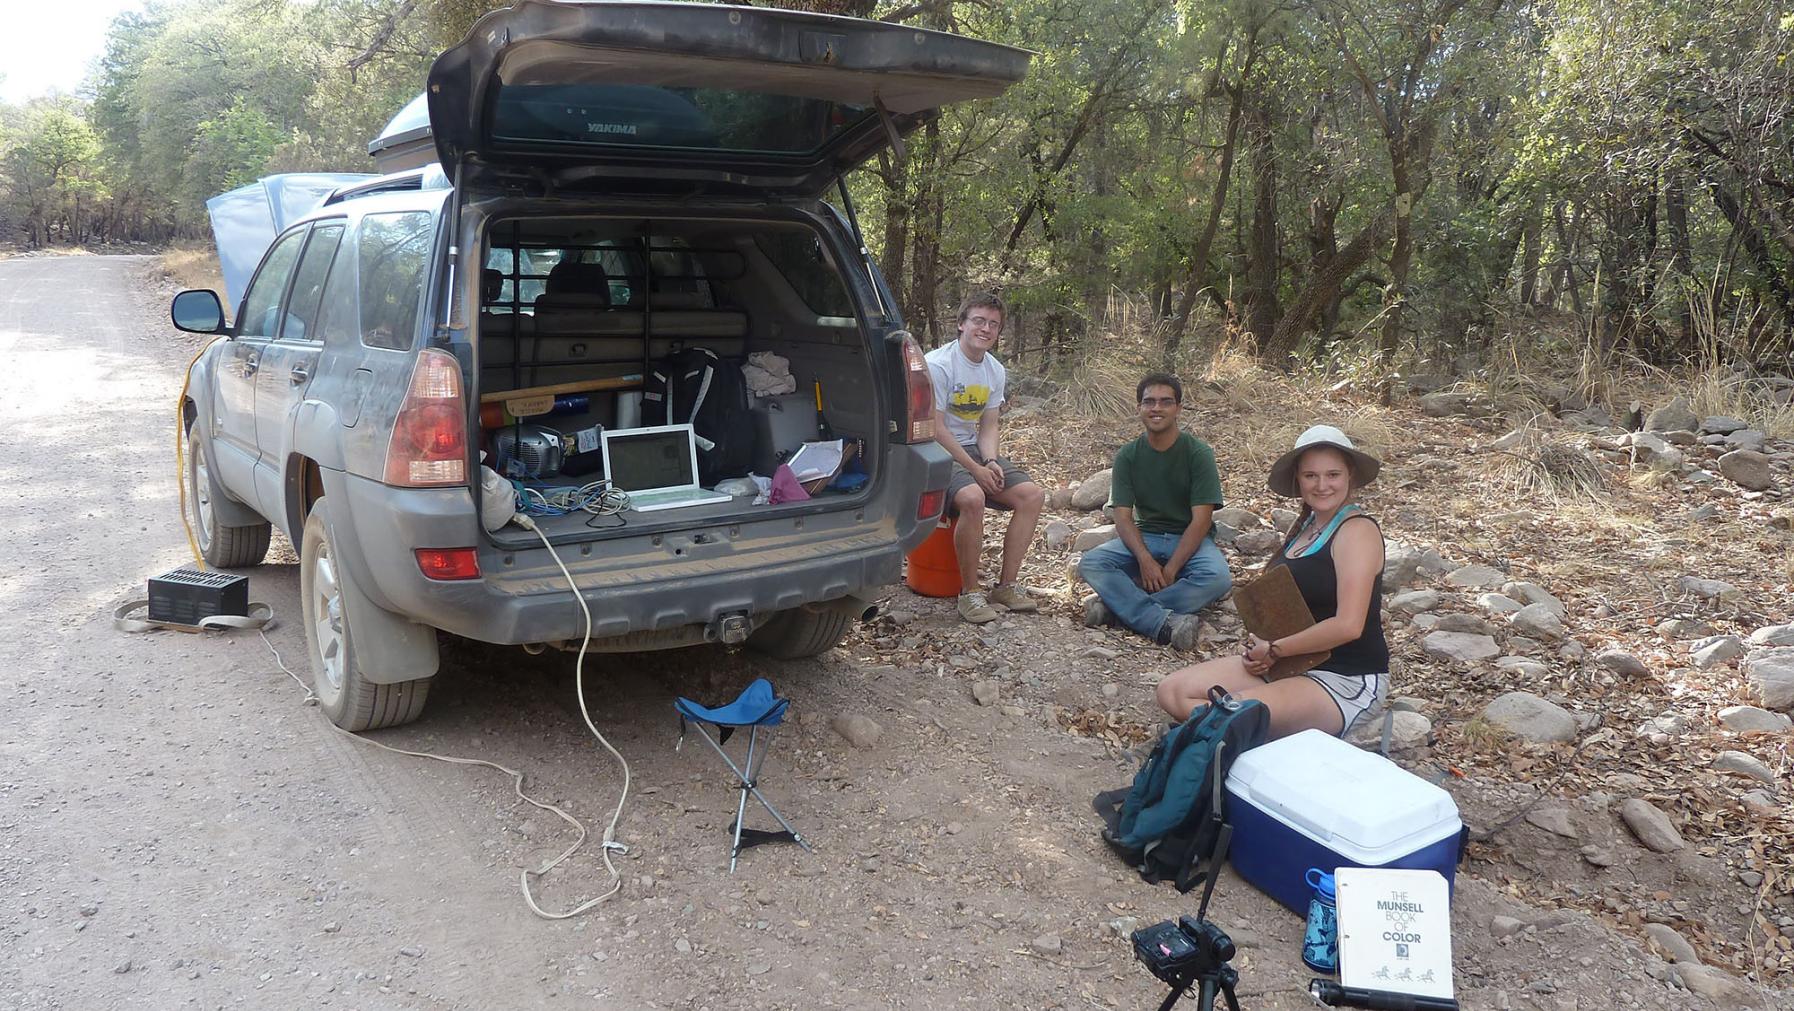 Students sit by an SUV with equipment surrounding them, while conducting fieldwork